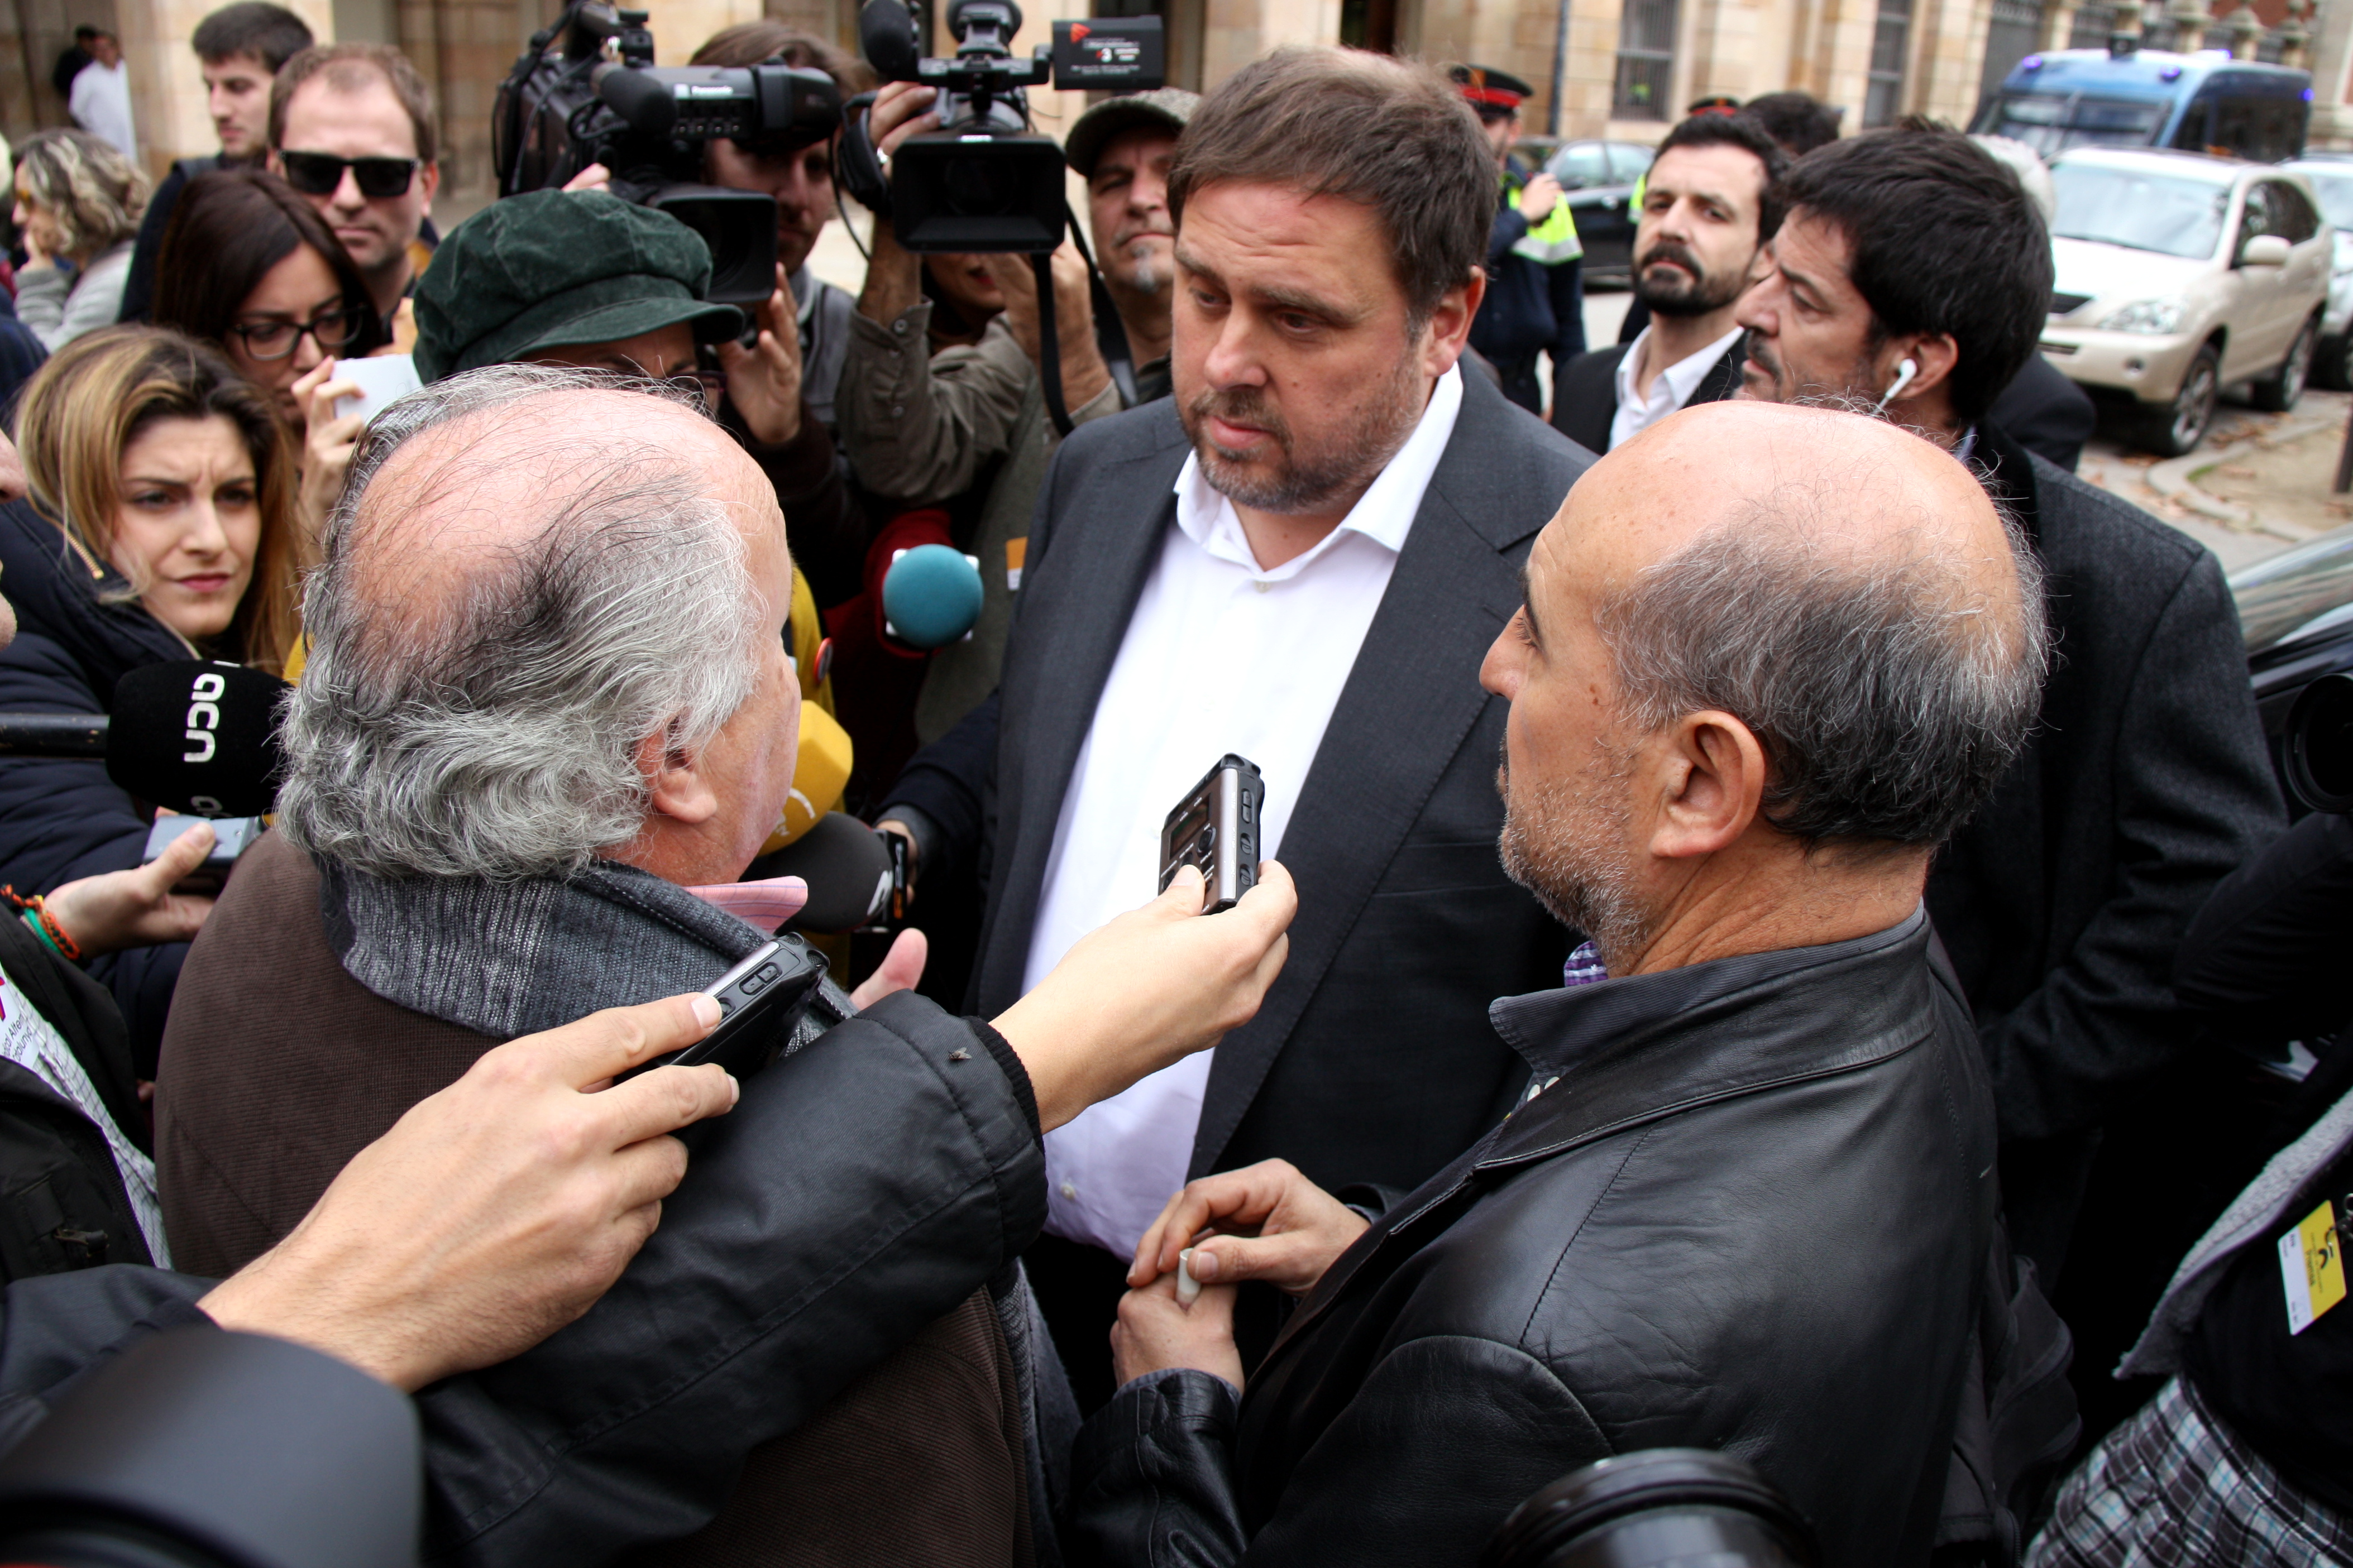 Catalan Vice President and Minister for Economy, Oriol Junqueras surrounded by journalists (by ACN)